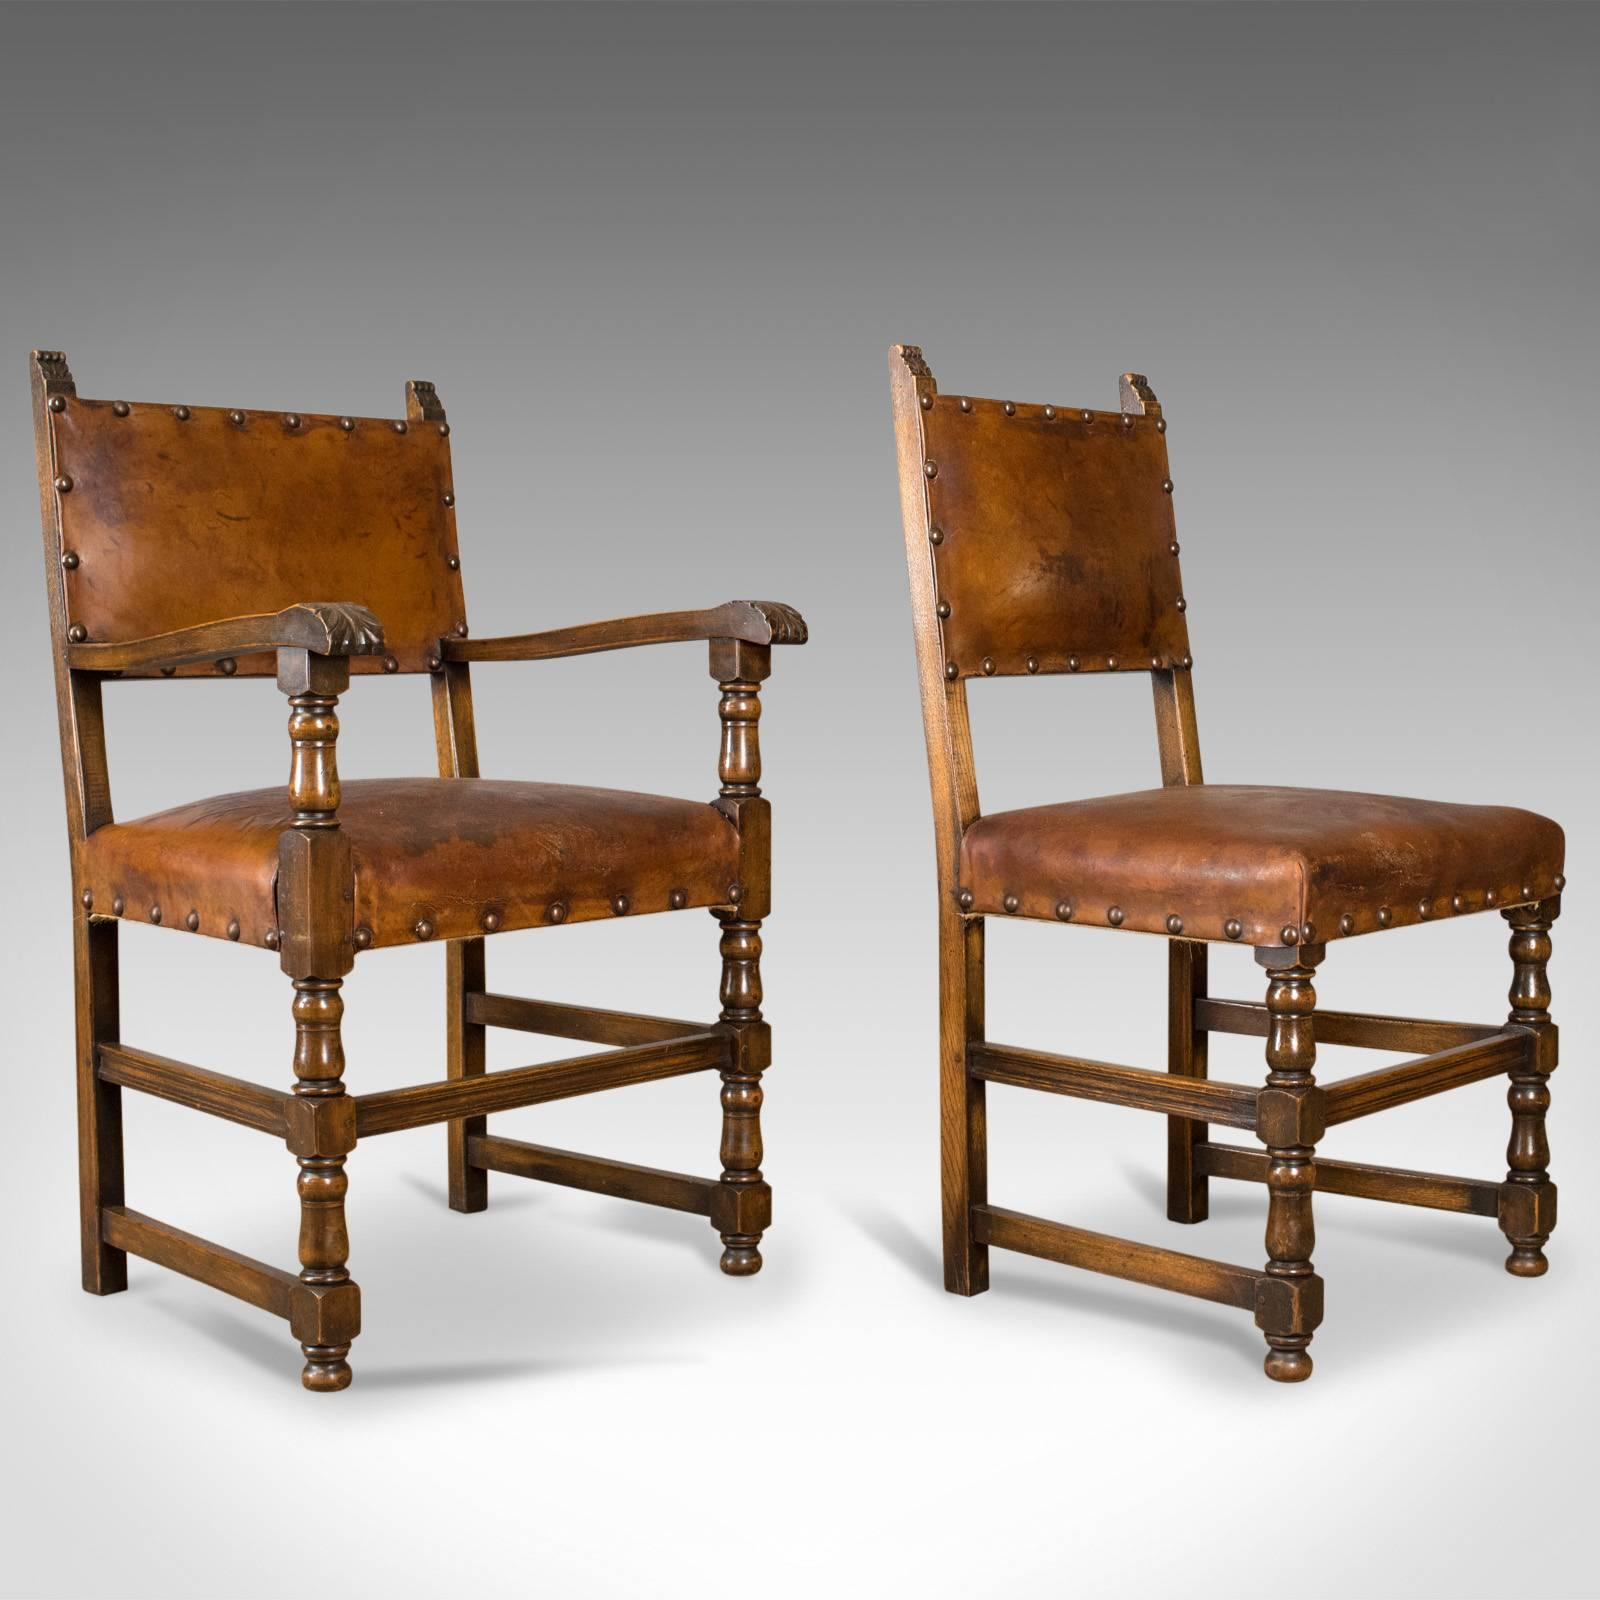 English Set of Six Antique Dining Chairs, Edwardian in 17th Century Taste, Oak Leather